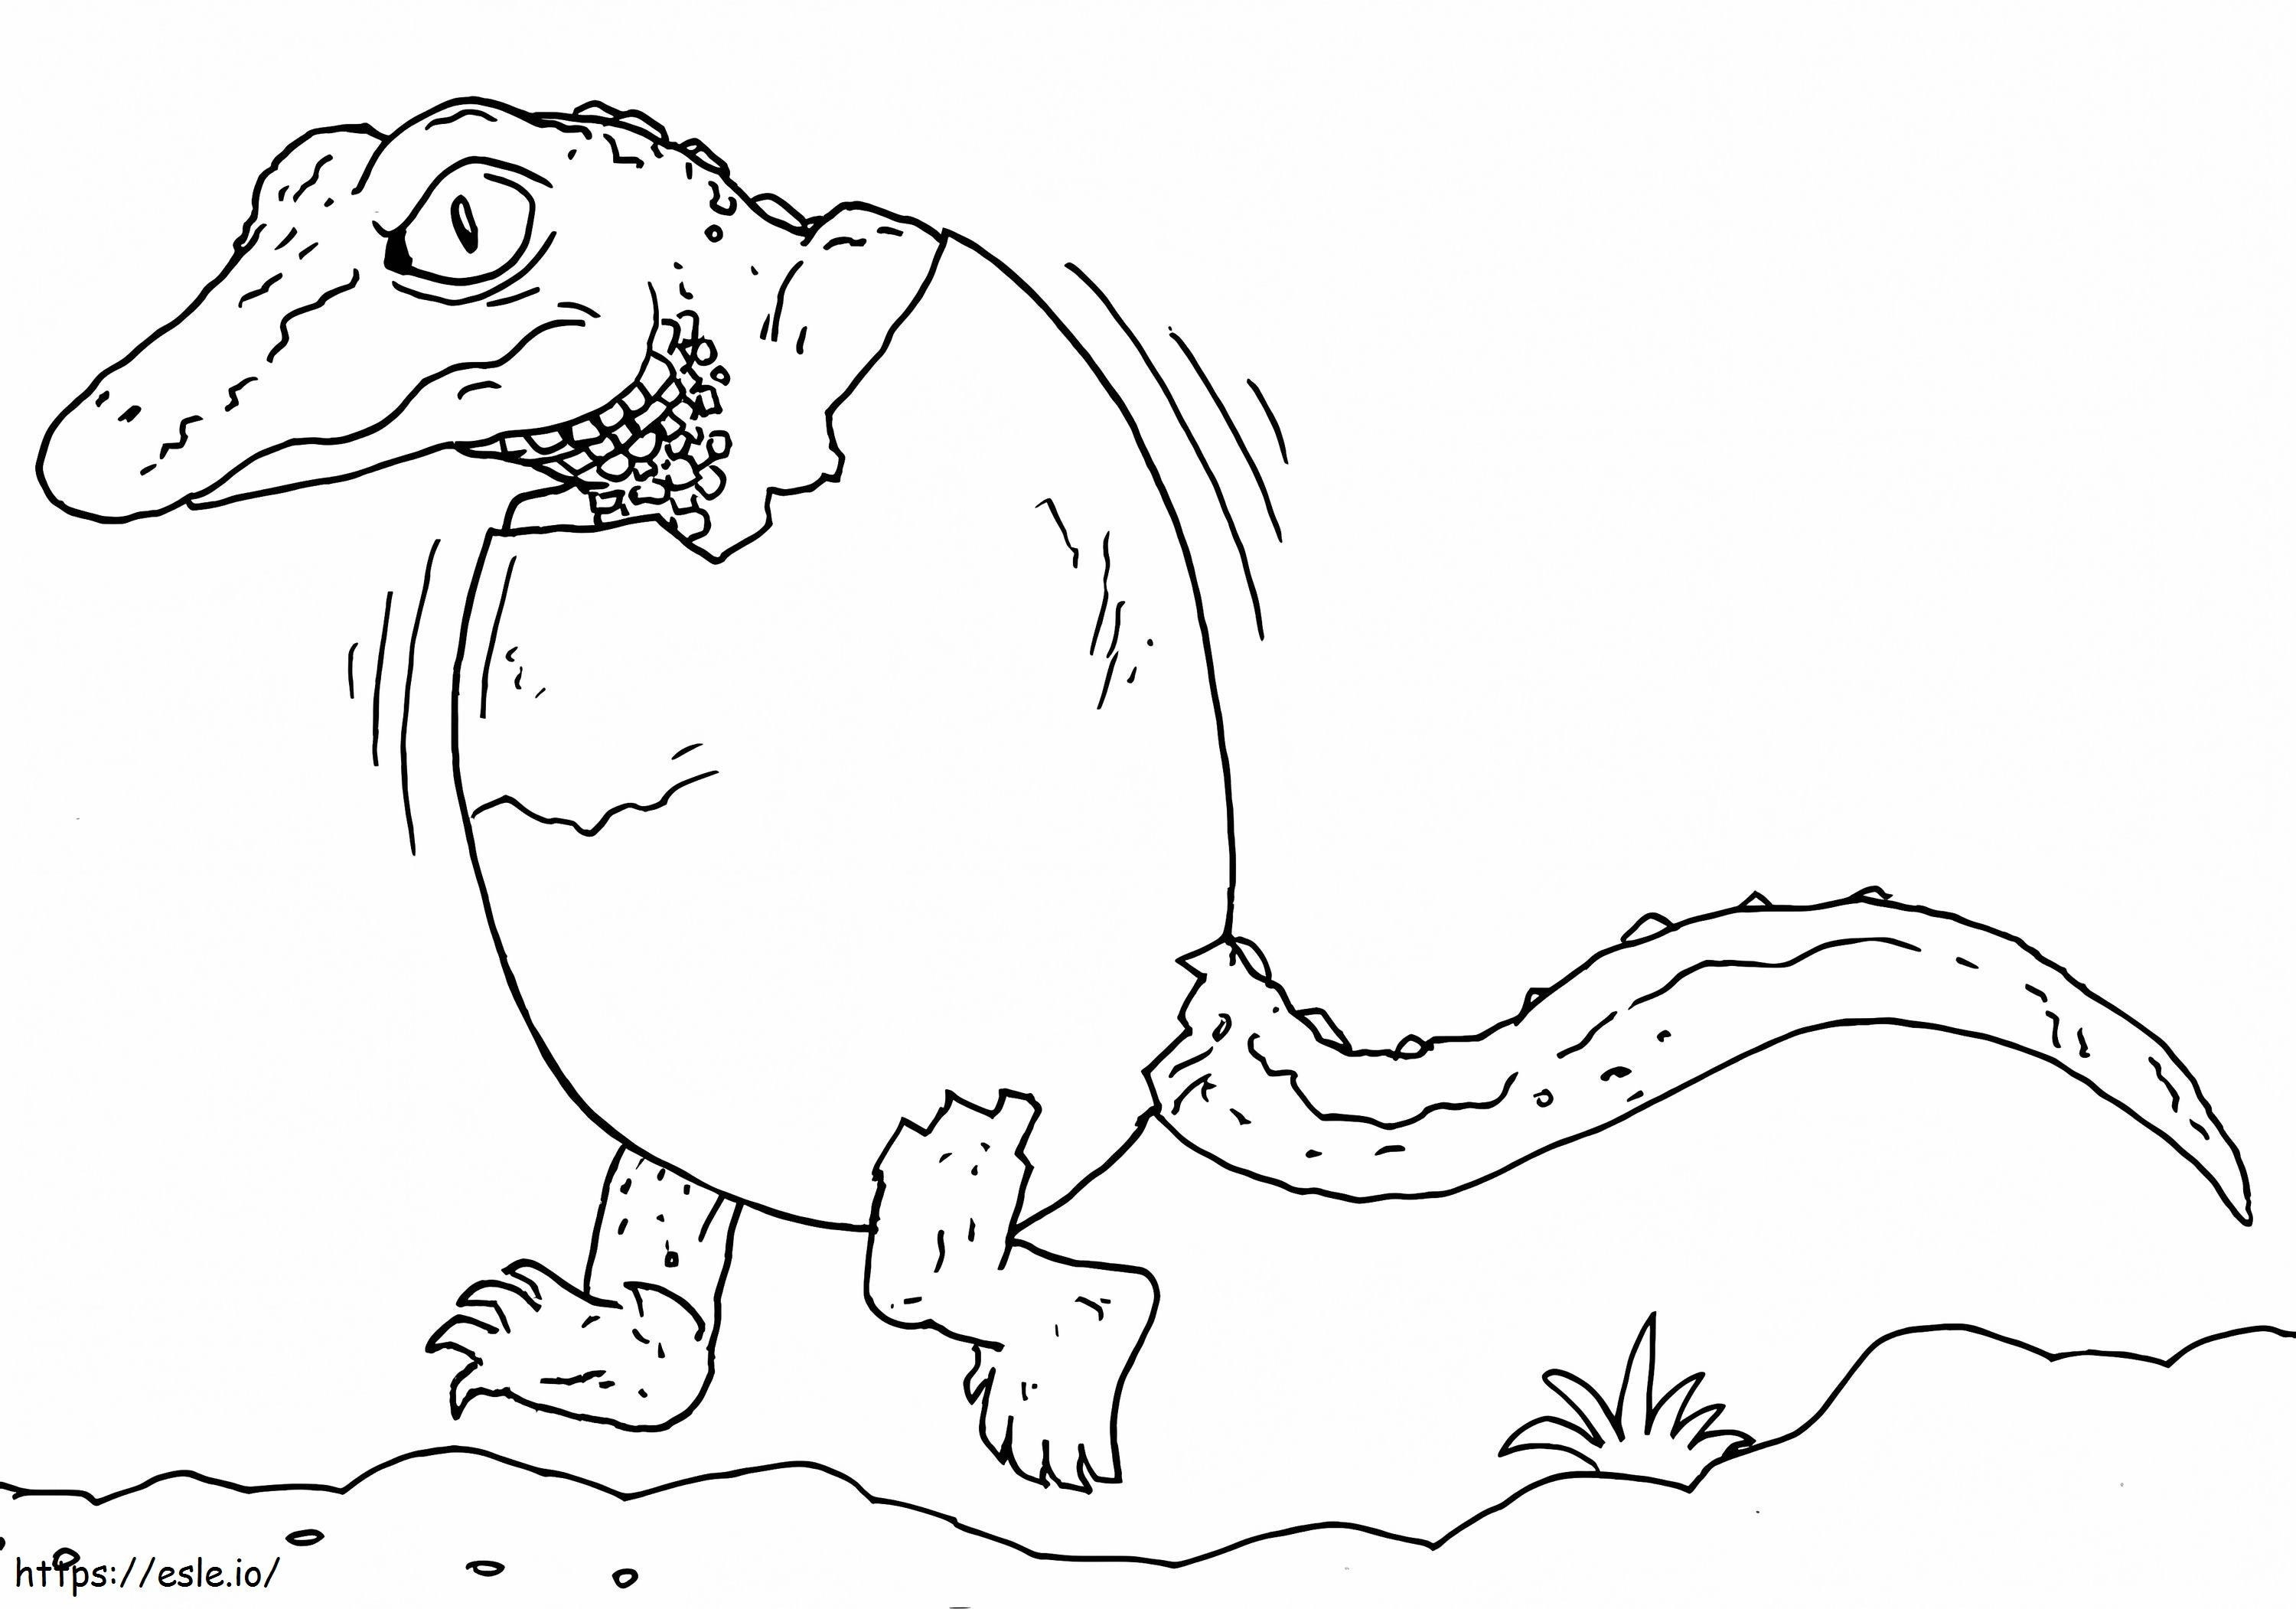 Alligator In Egg coloring page